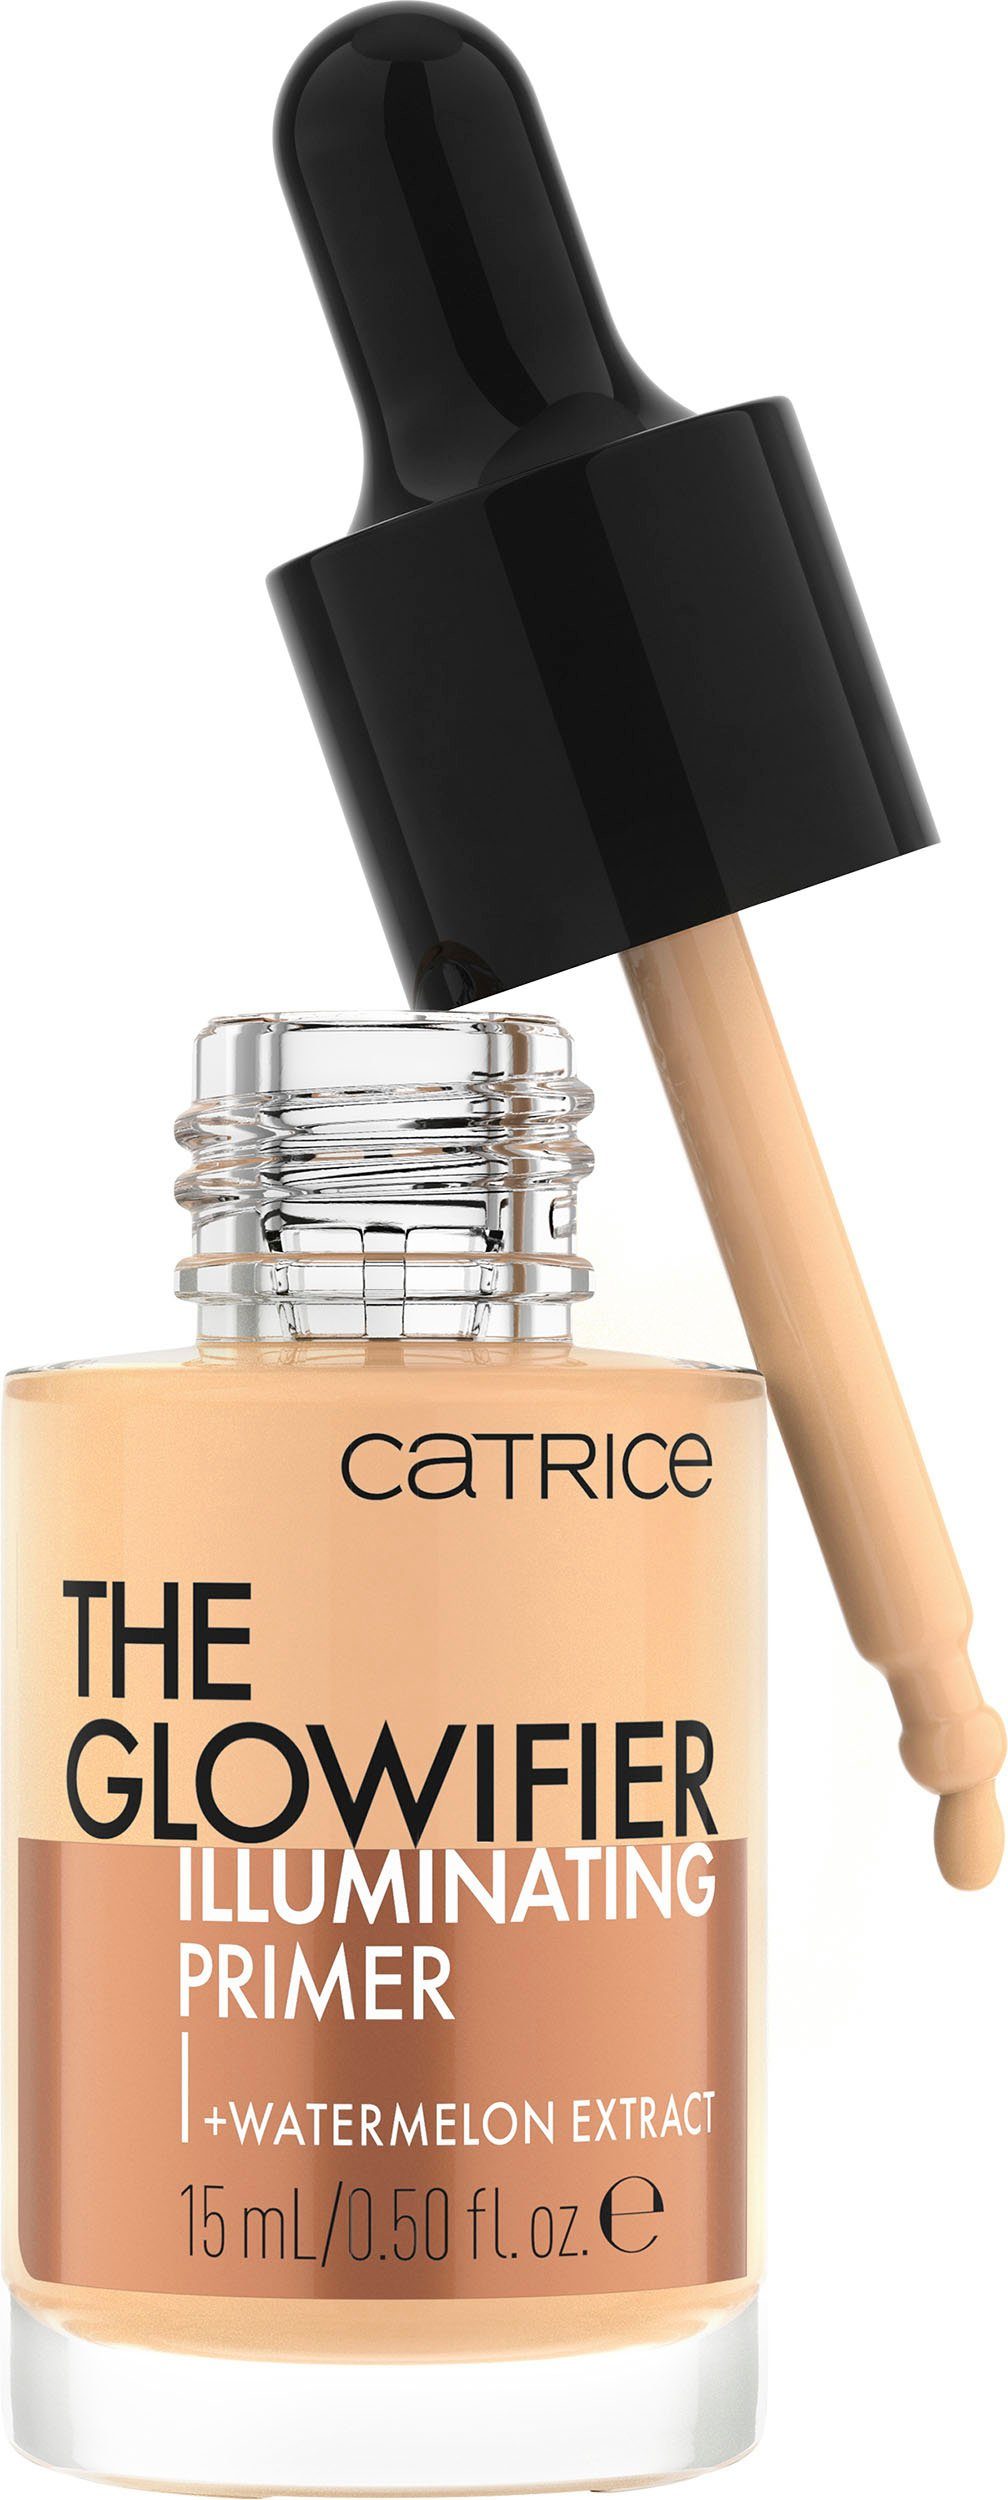 Catrice Primer Catrice The Glowifier Illuminating Primer 010, 3-tlg.